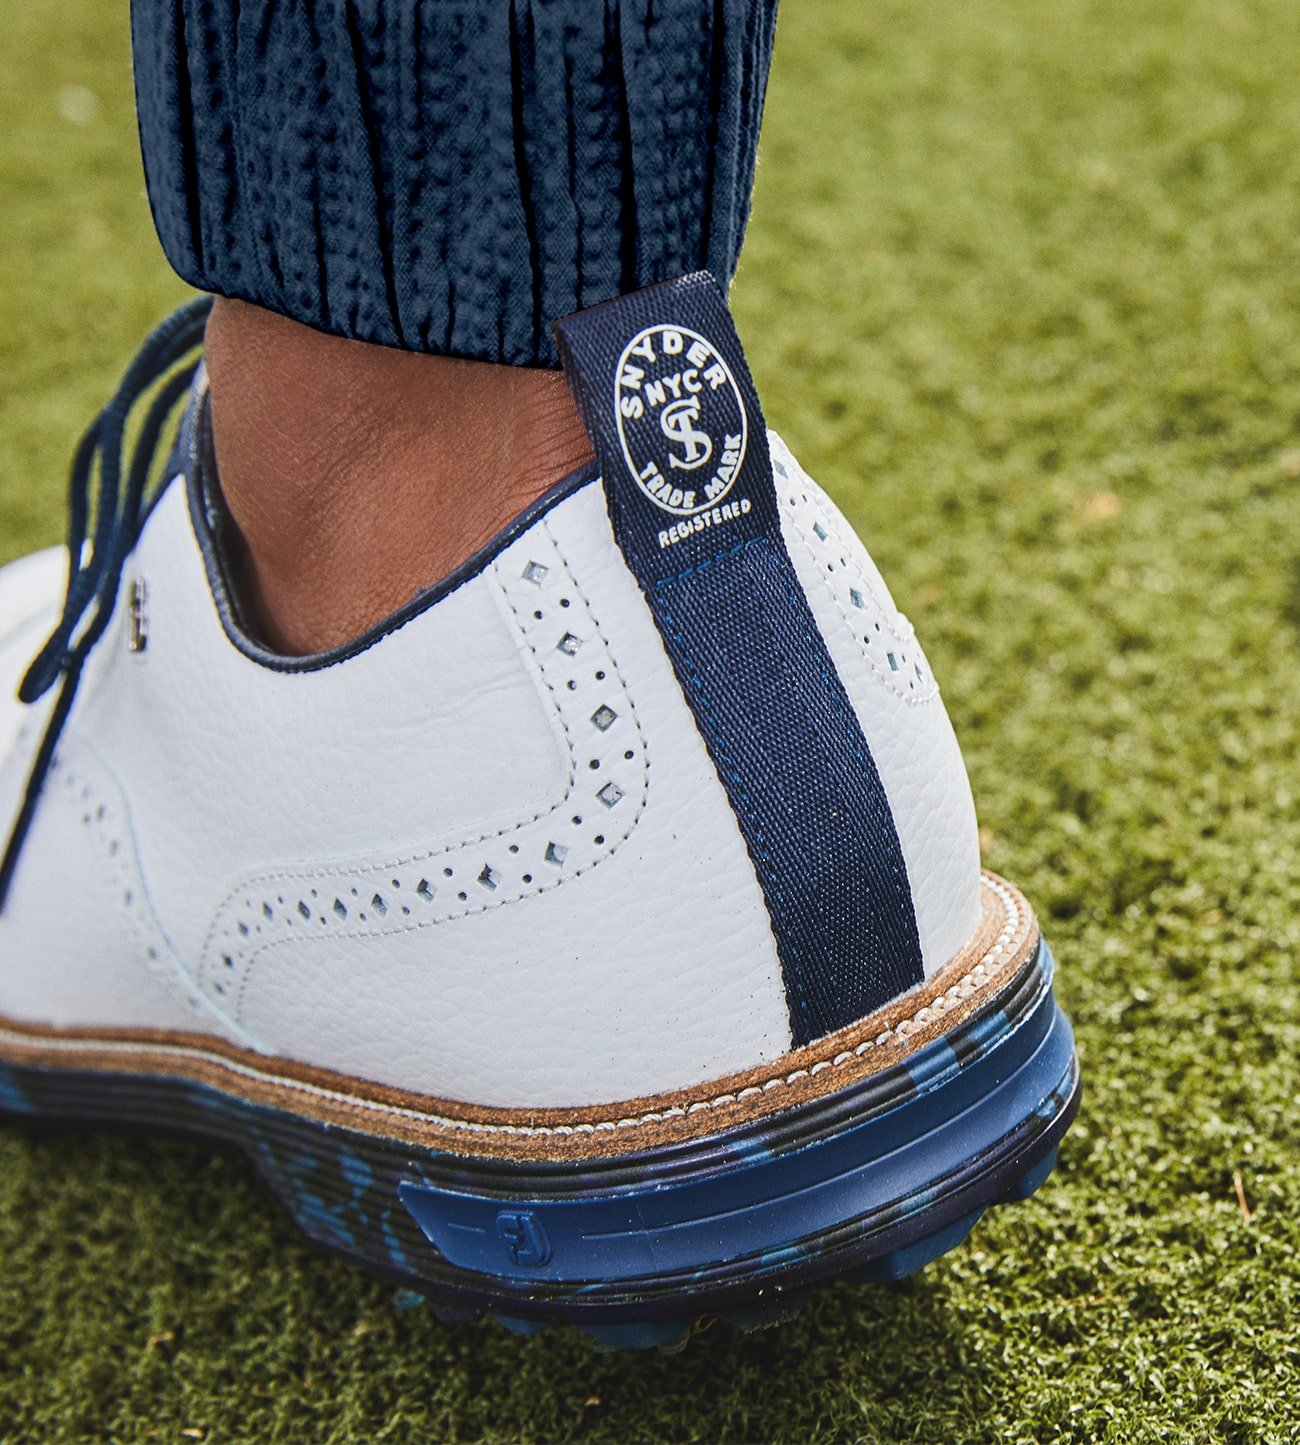 FootJoy: Coming Soon: Our Latest Collaboration | Milled